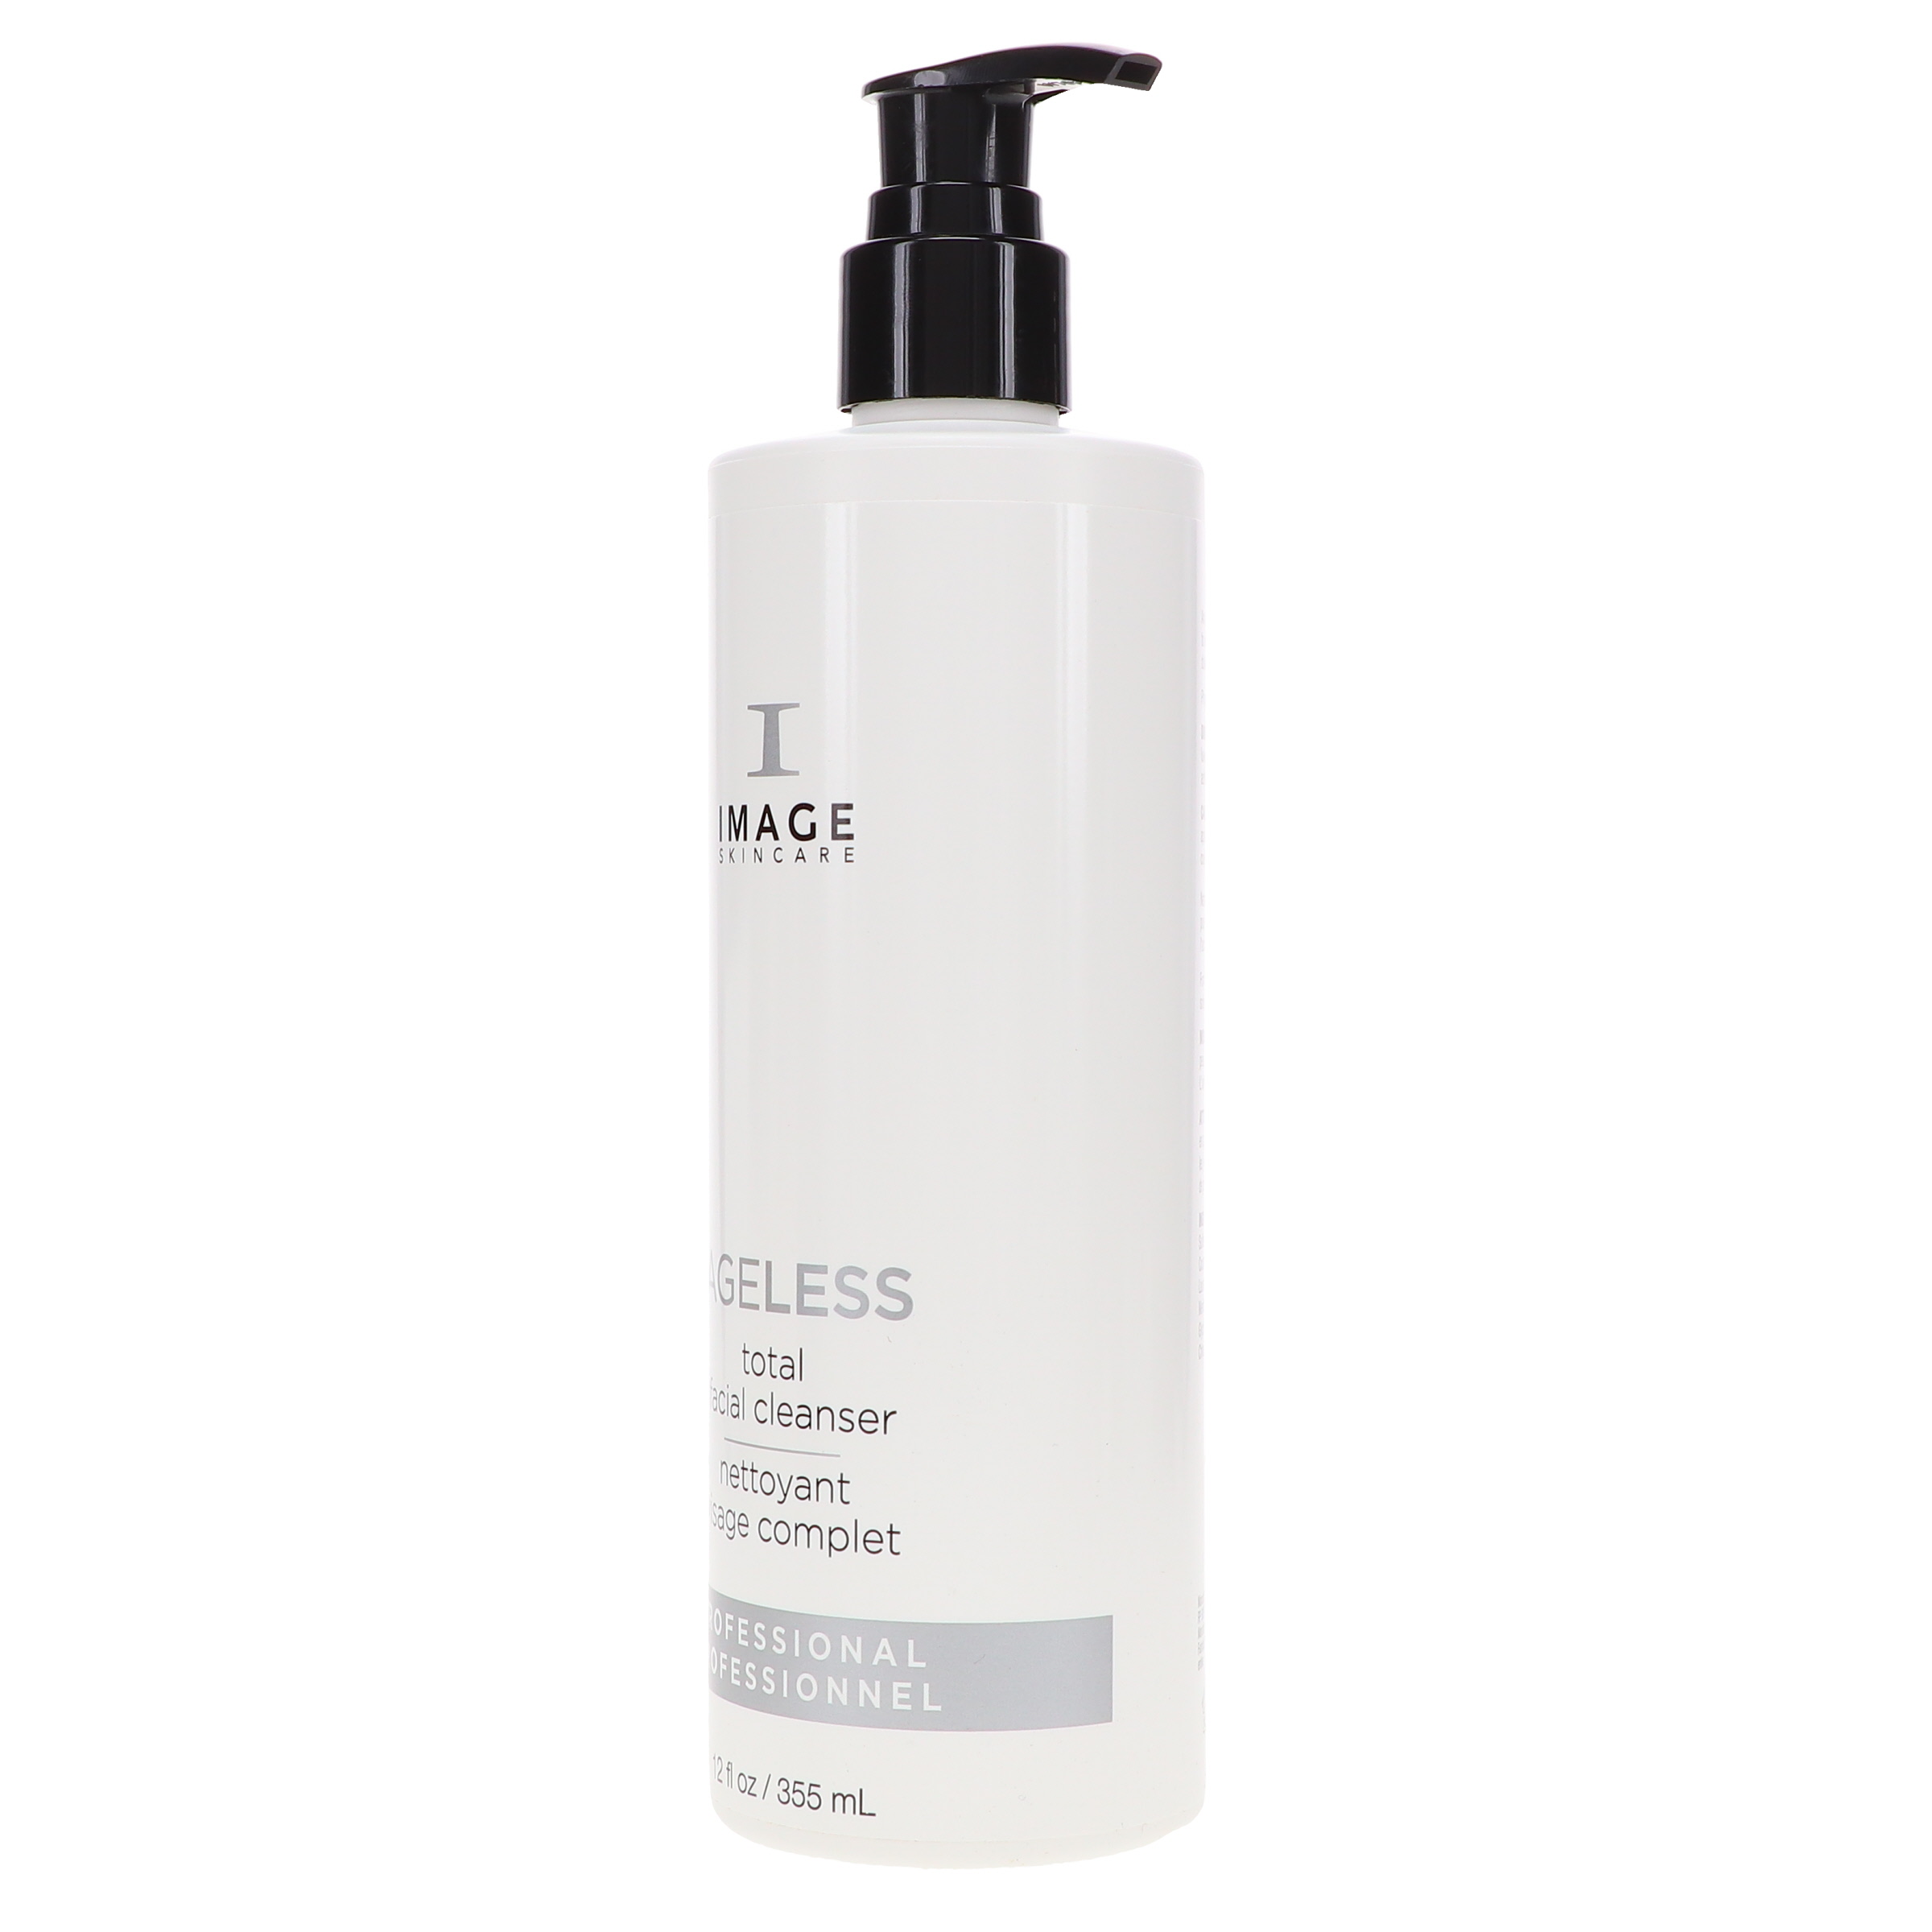 IMAGE Skincare Ageless Total Facial Cleanser 12 oz - image 3 of 9